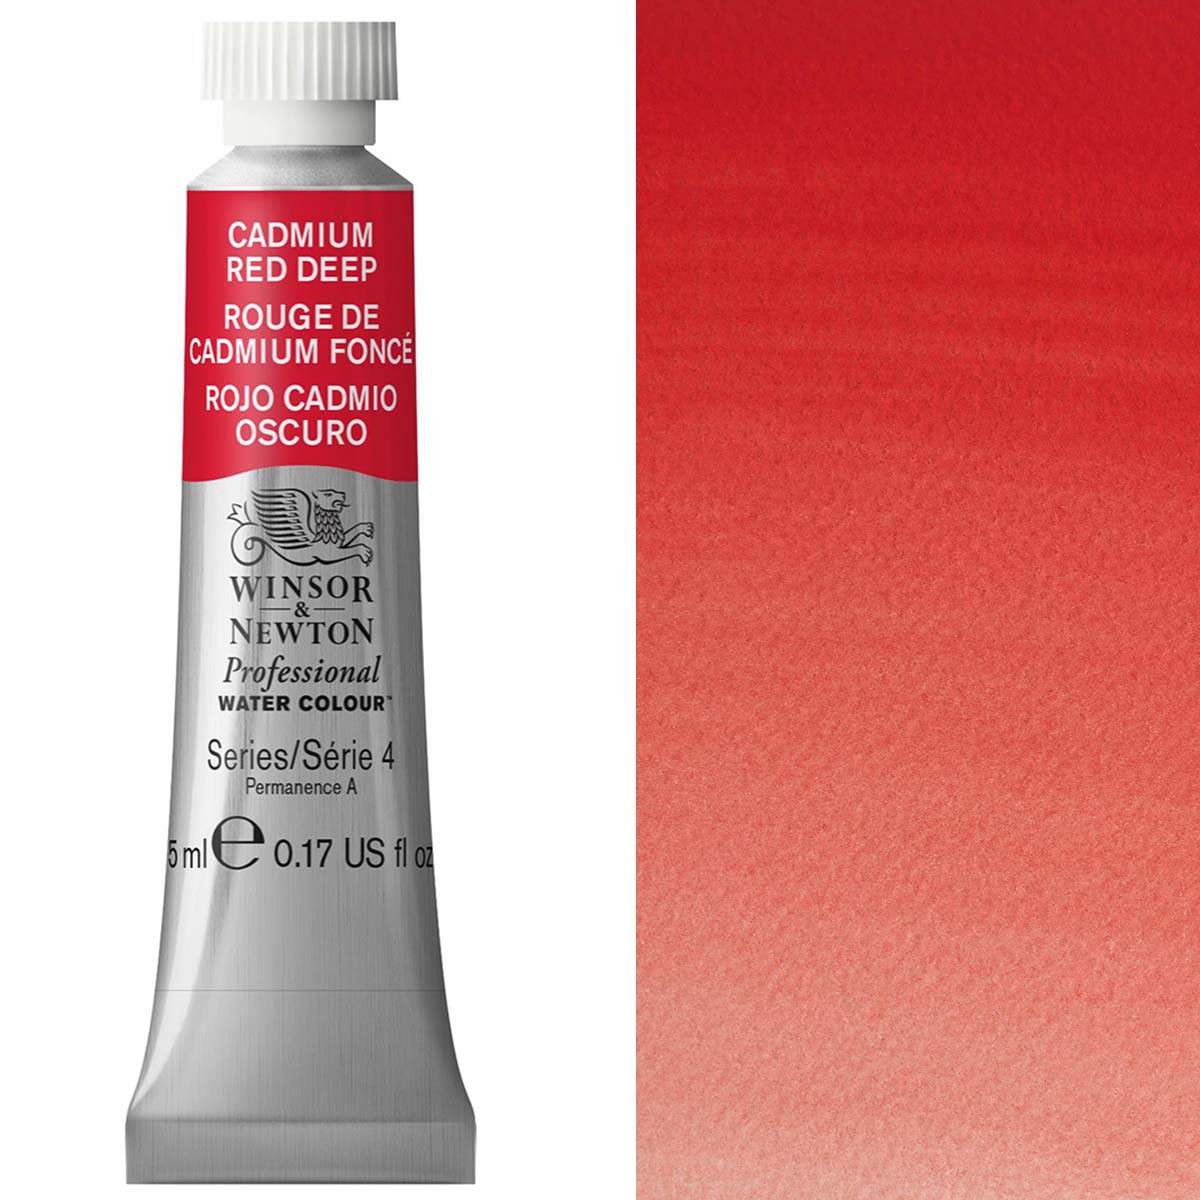 Winsor and Newton - Professional Artists' Watercolour - 5ml - Cadmium Red Deep